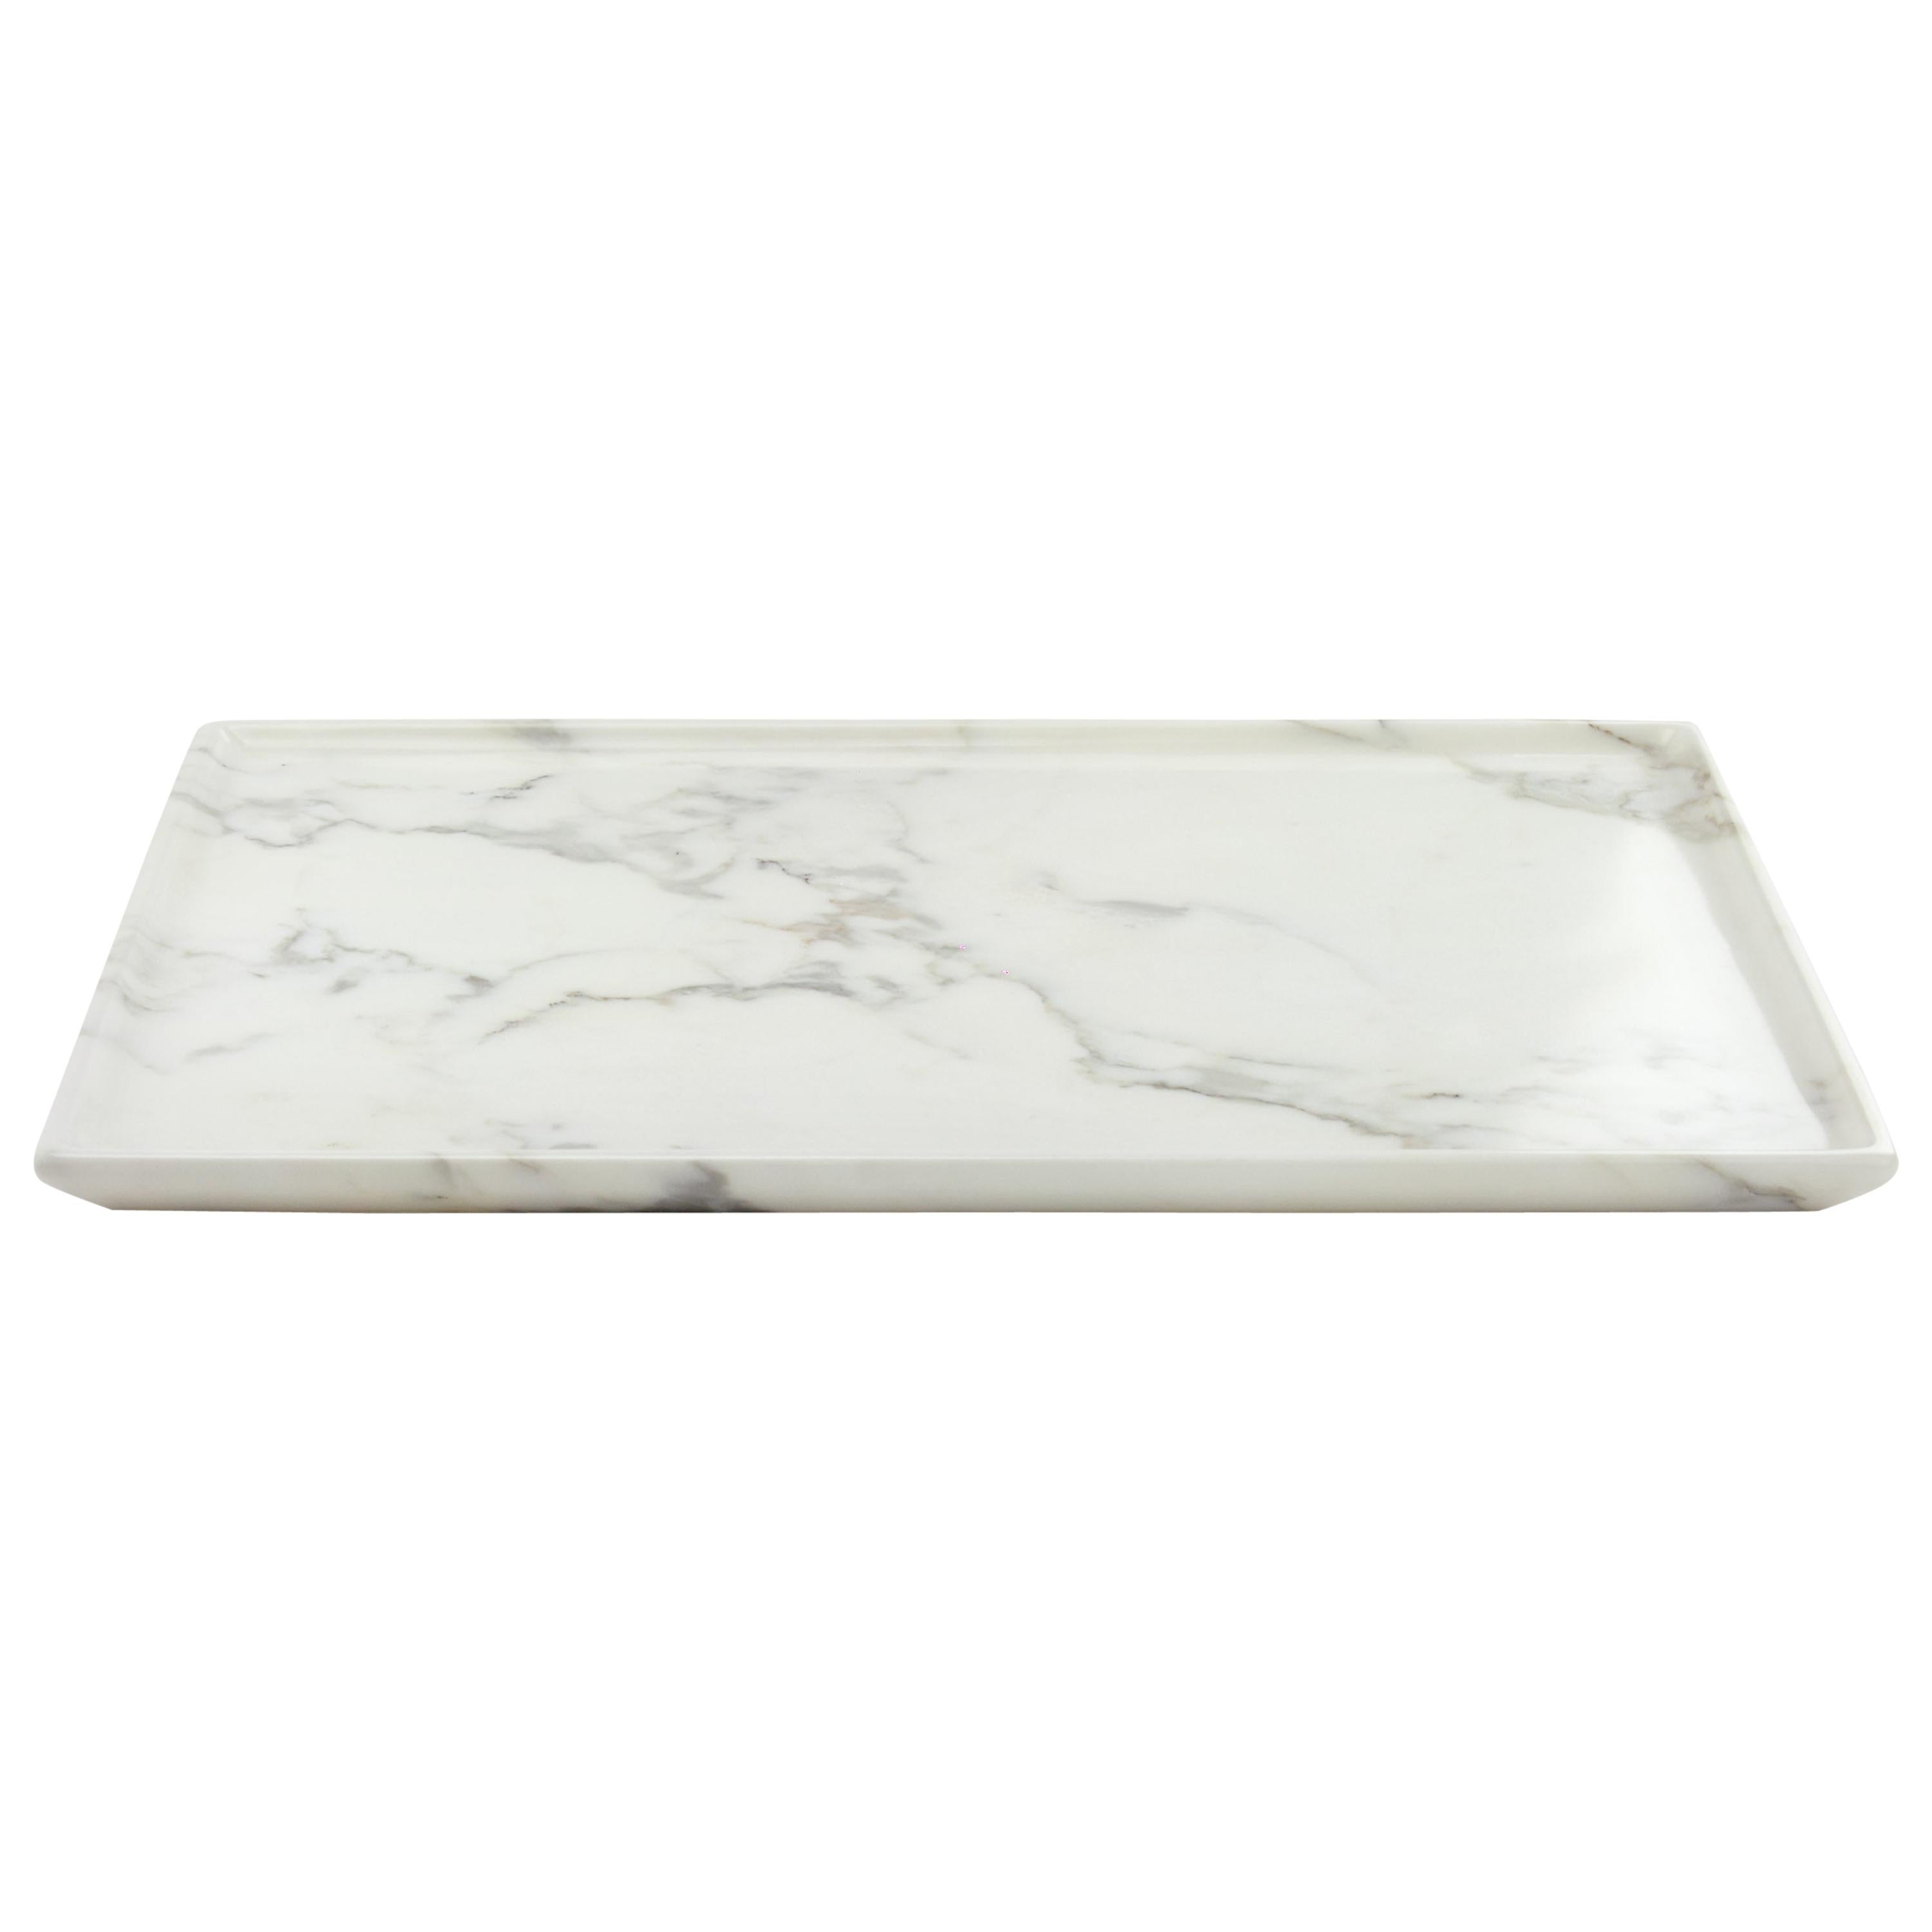 Tray Hand Carved from Solid Block of White Marble, Rectangular, Made in Italy For Sale